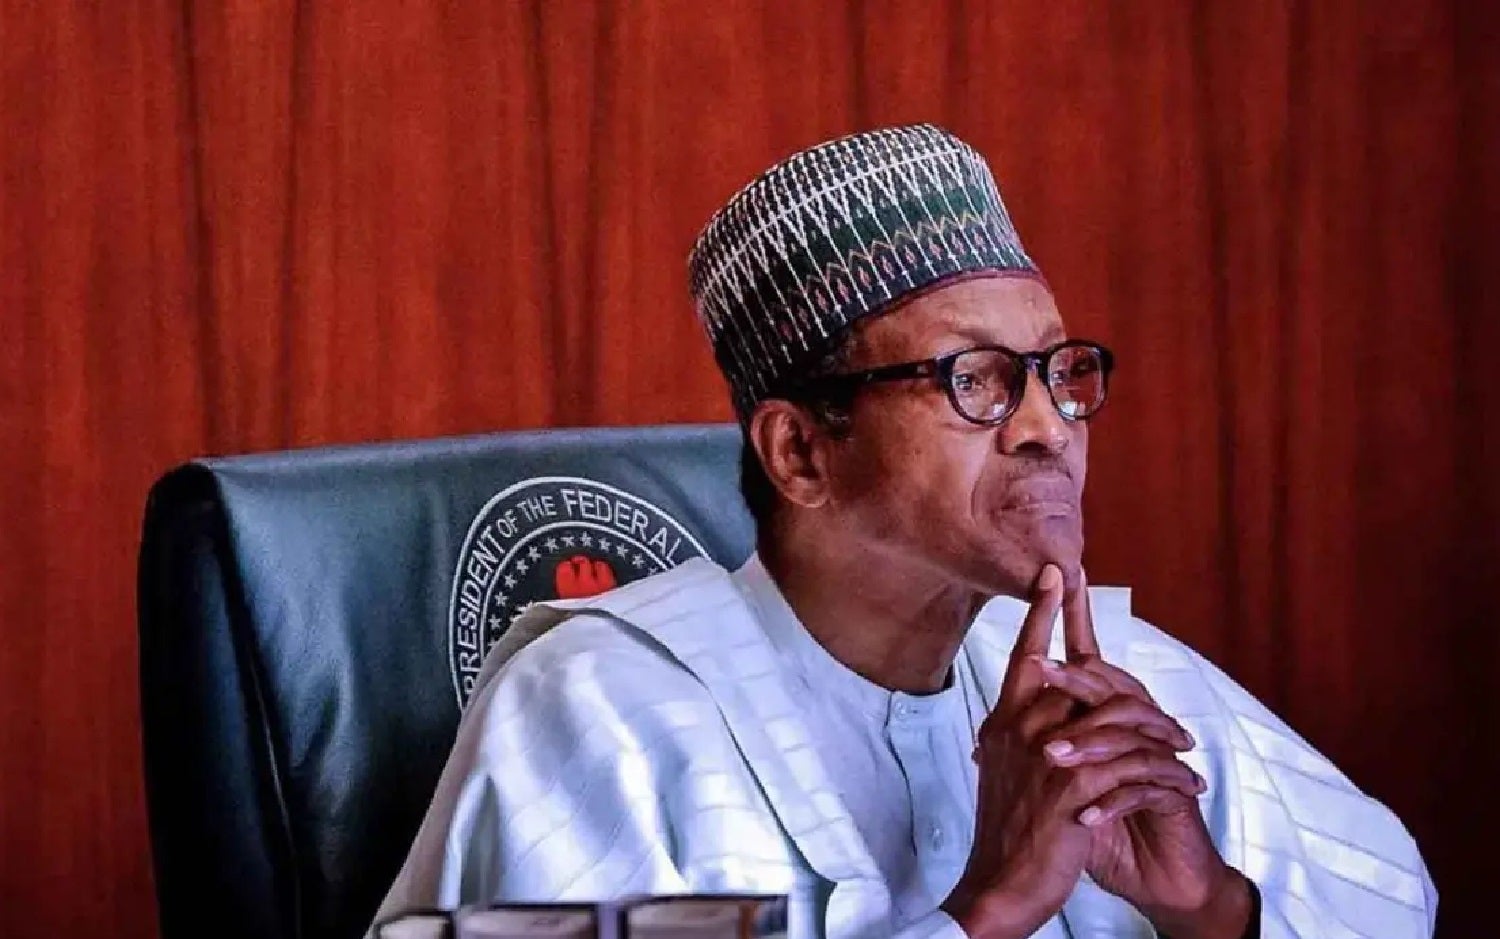 With a leadership style that does not meet aspirations of the moment, more and more Nigerians now see President Buhari as part of the problem and less of a solution